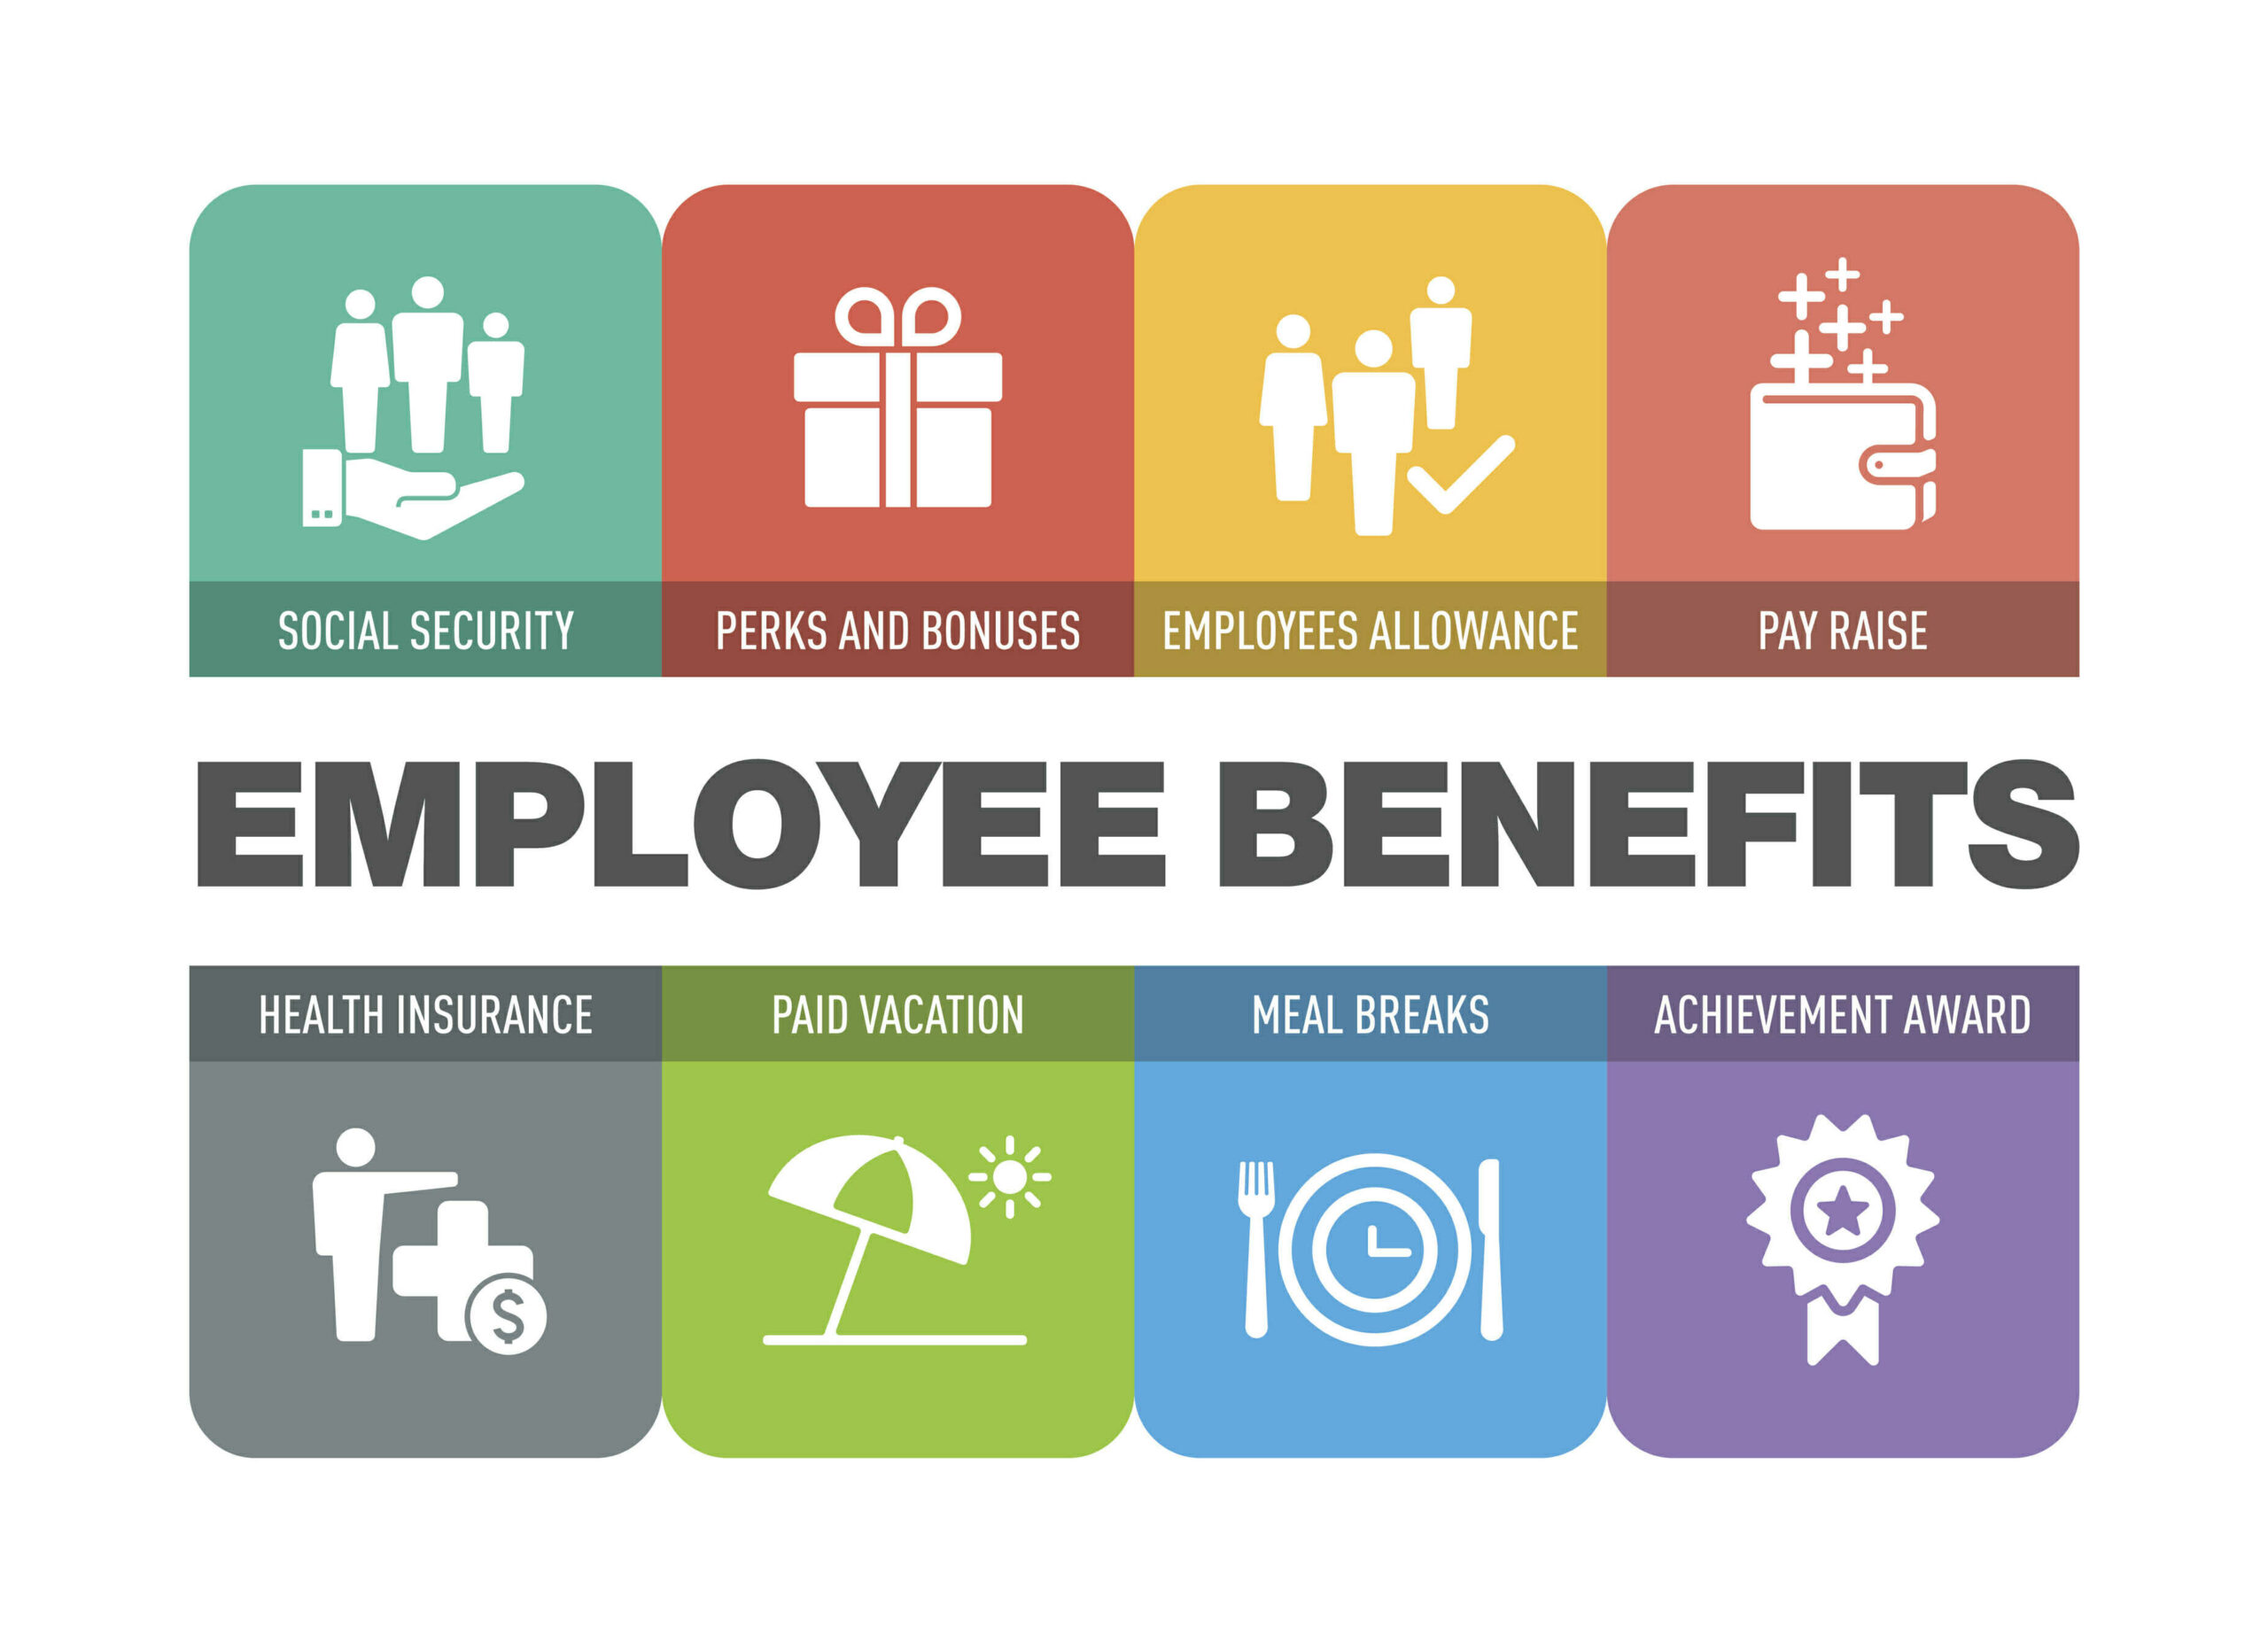 What makes employee benefit packages great?